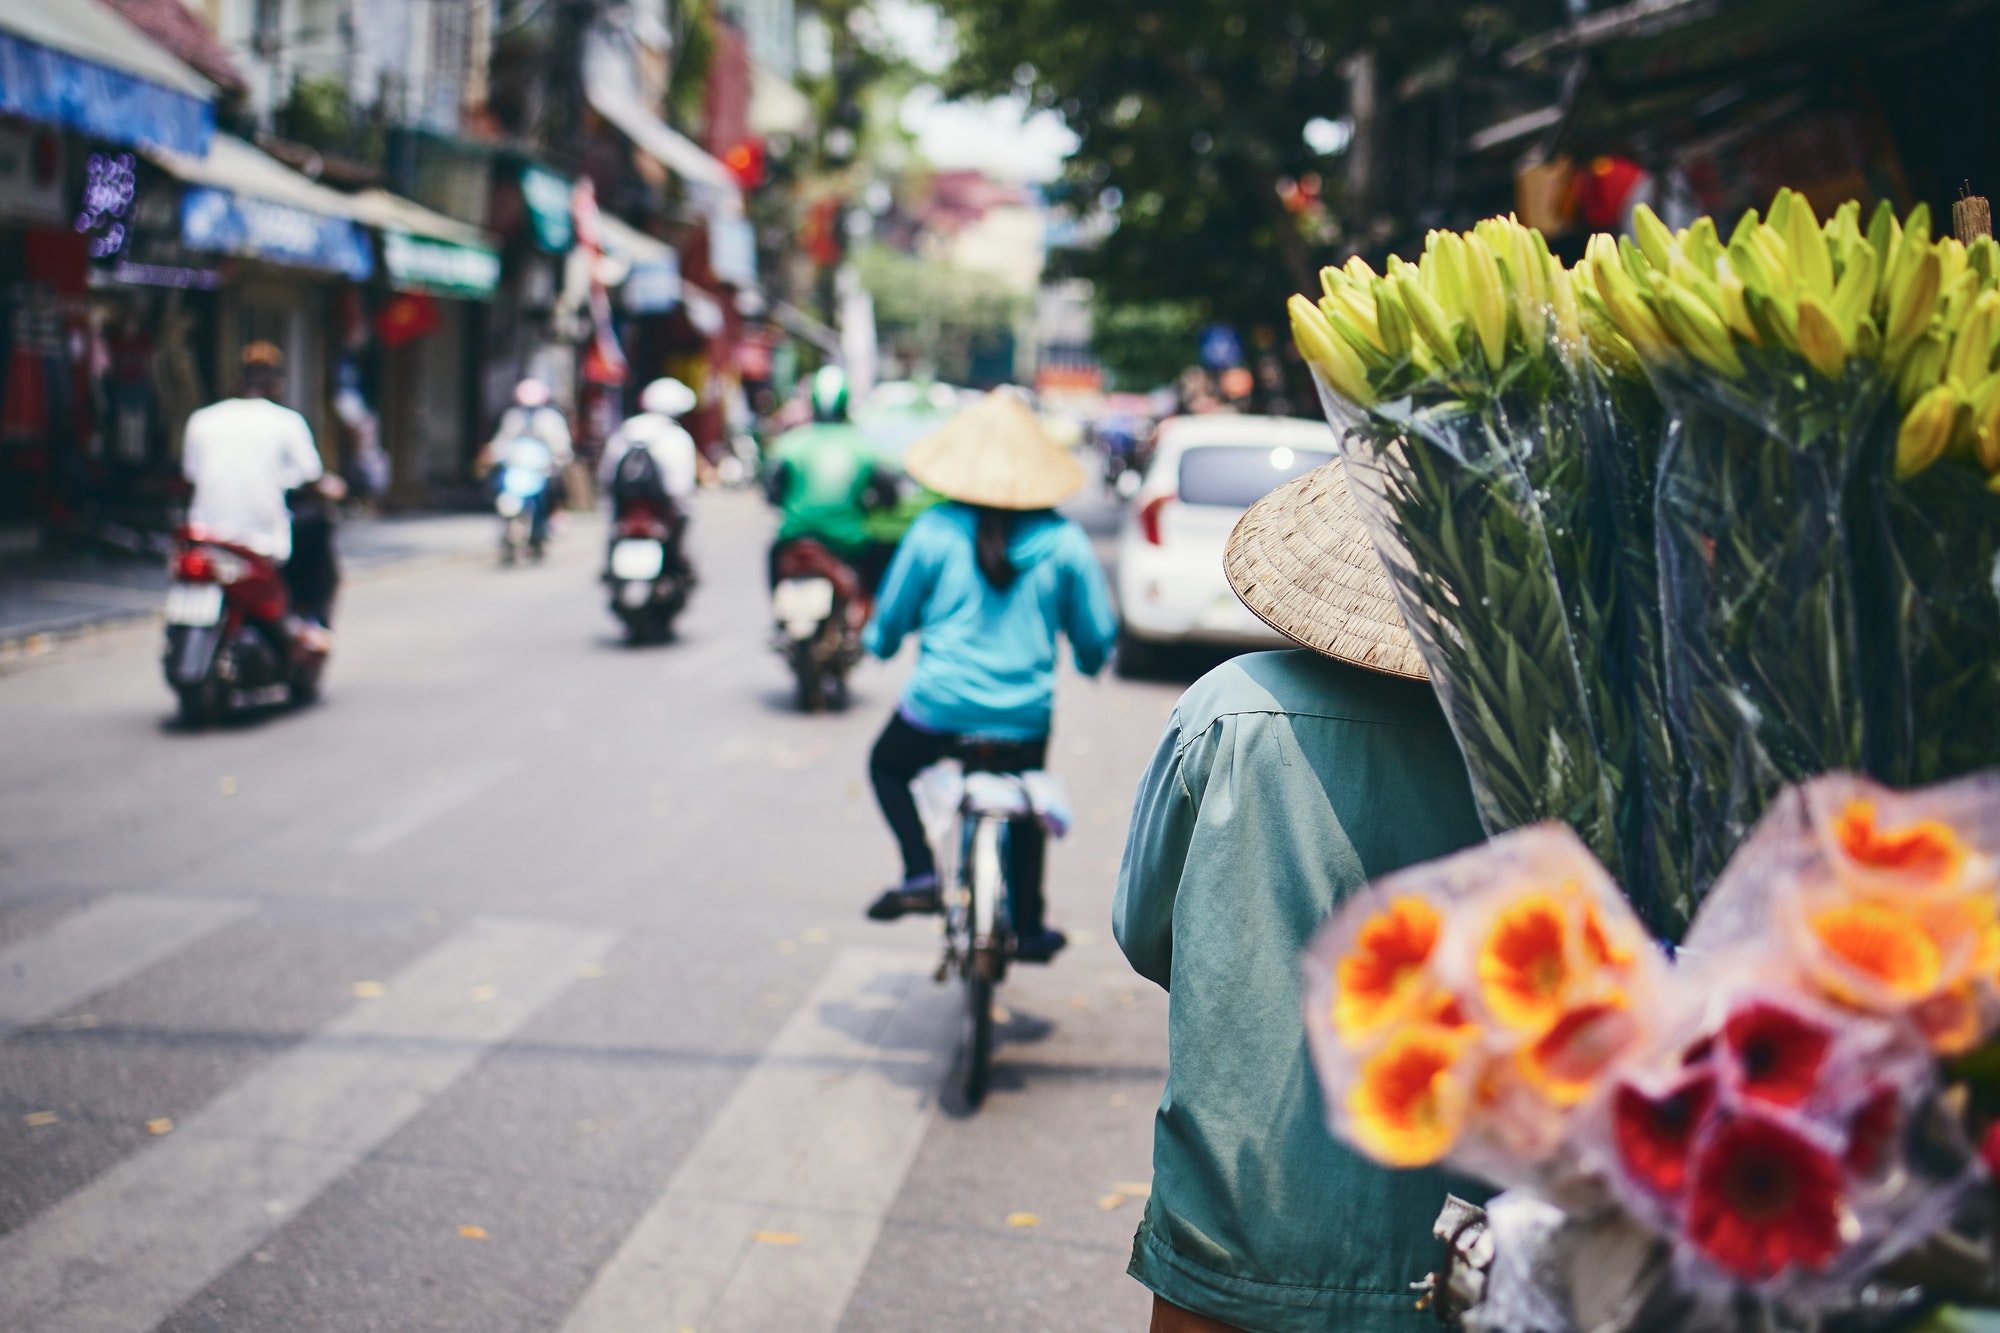 City life in street of old quarter in Hanoi. Flower vendor in traditional conical hat, Vietnam.